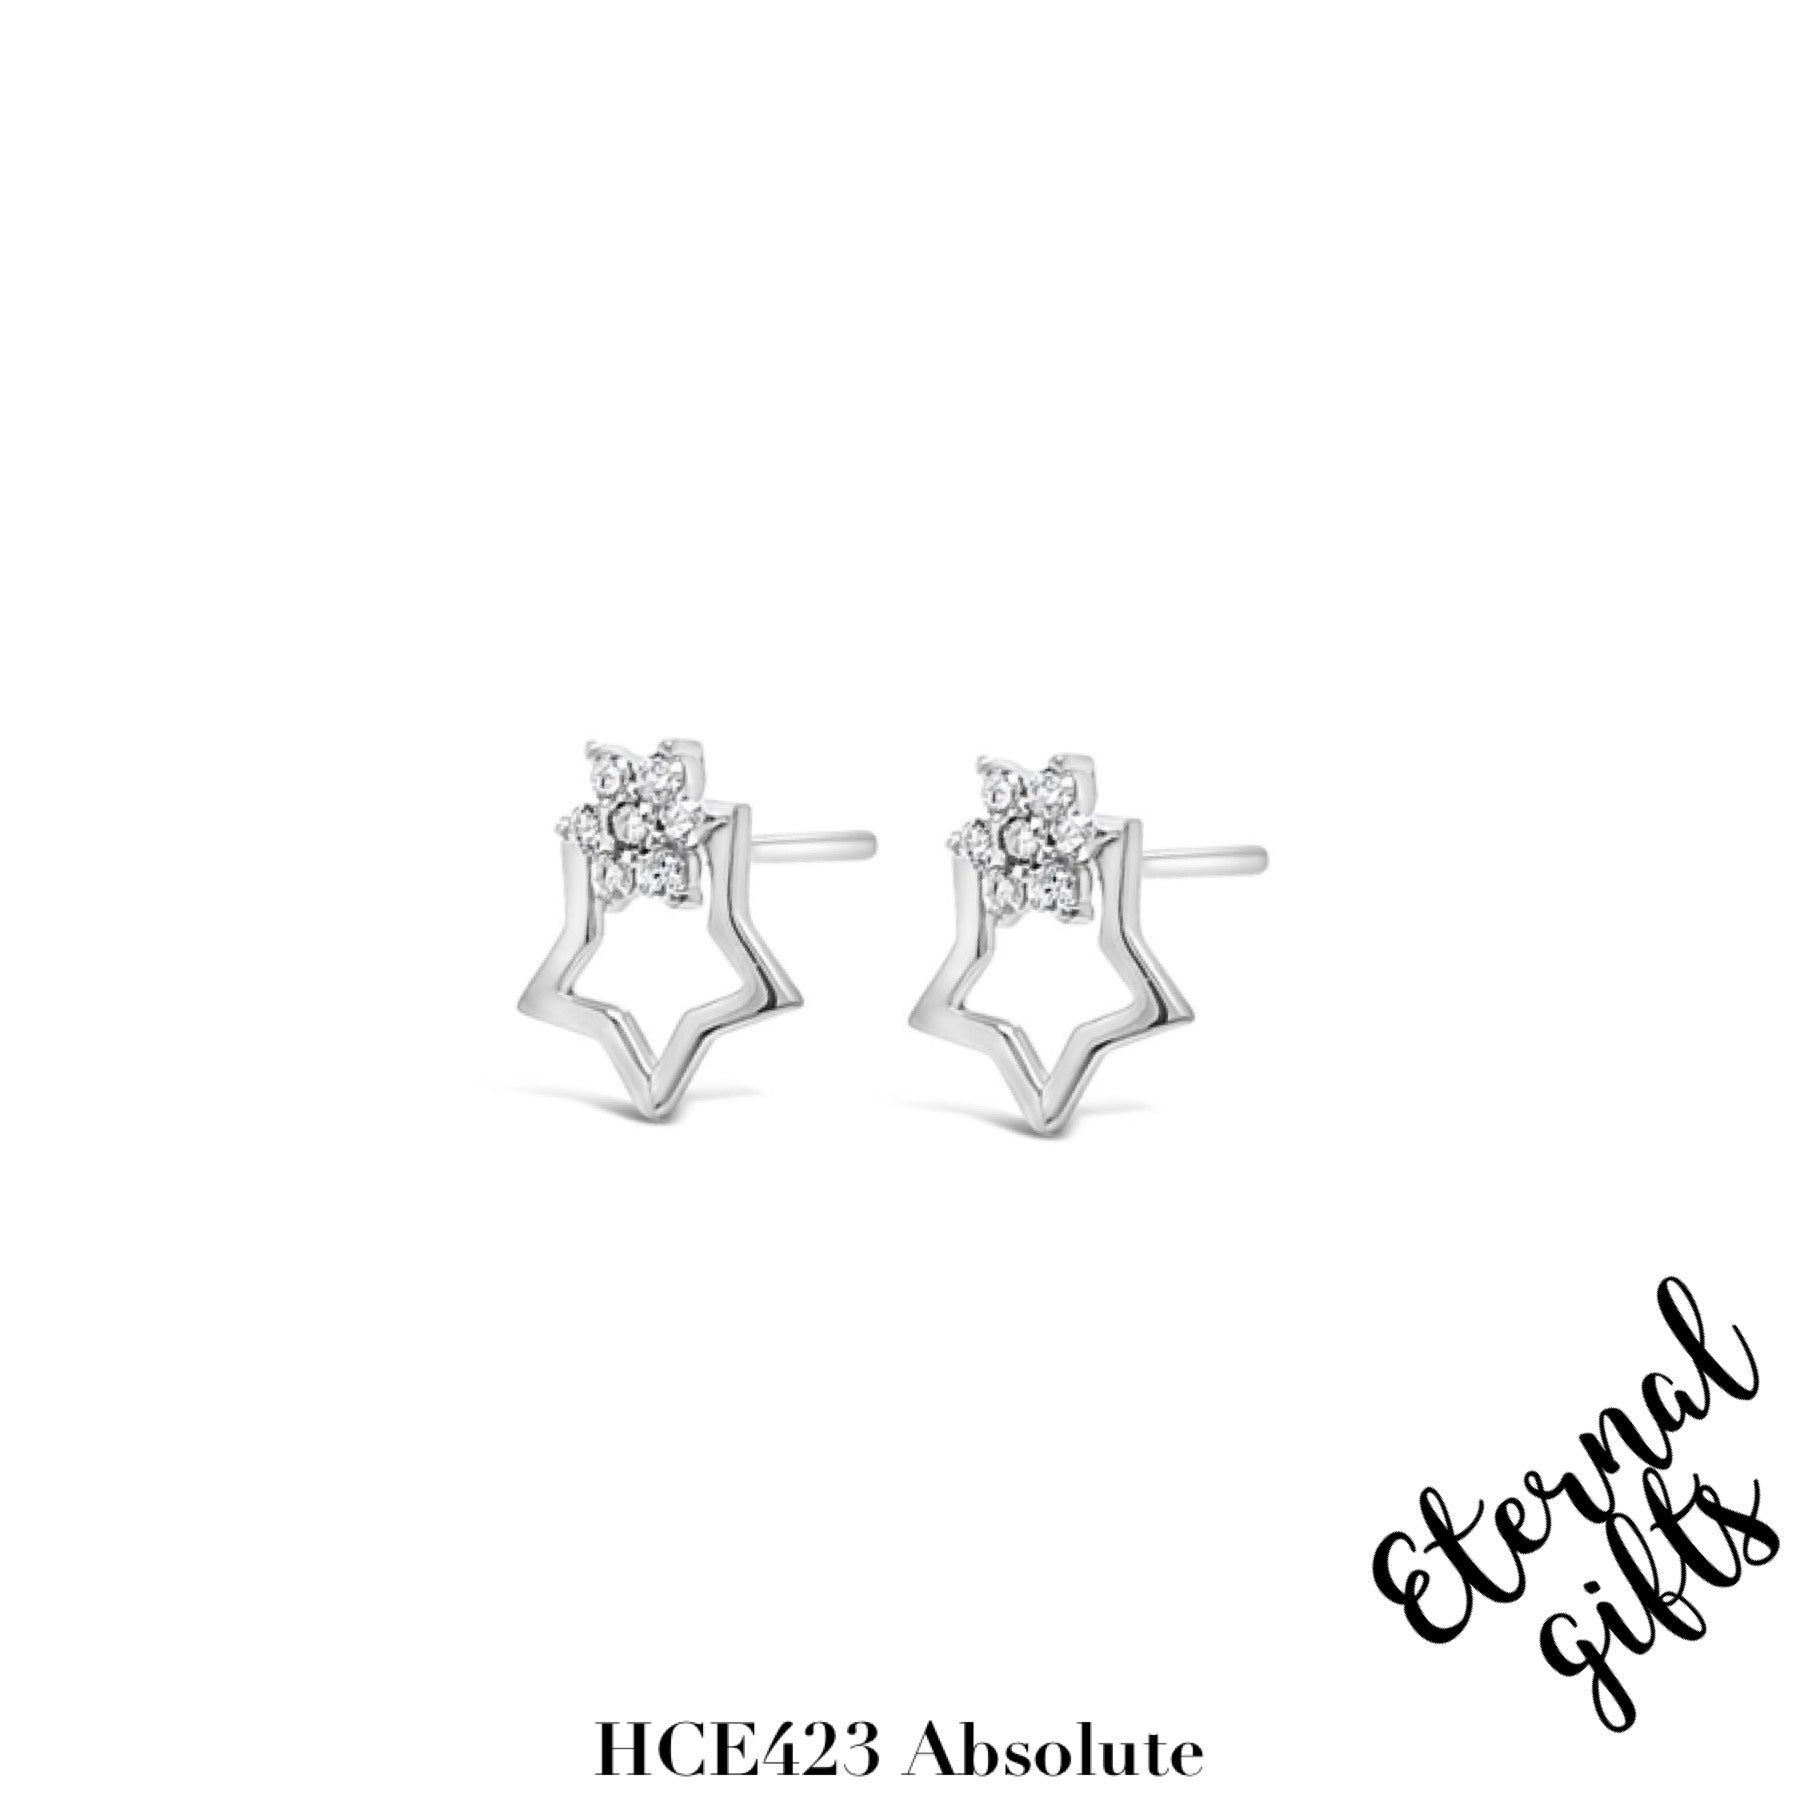 Silver Star Stud Earrings HCE423 - Absolute Kids Collection